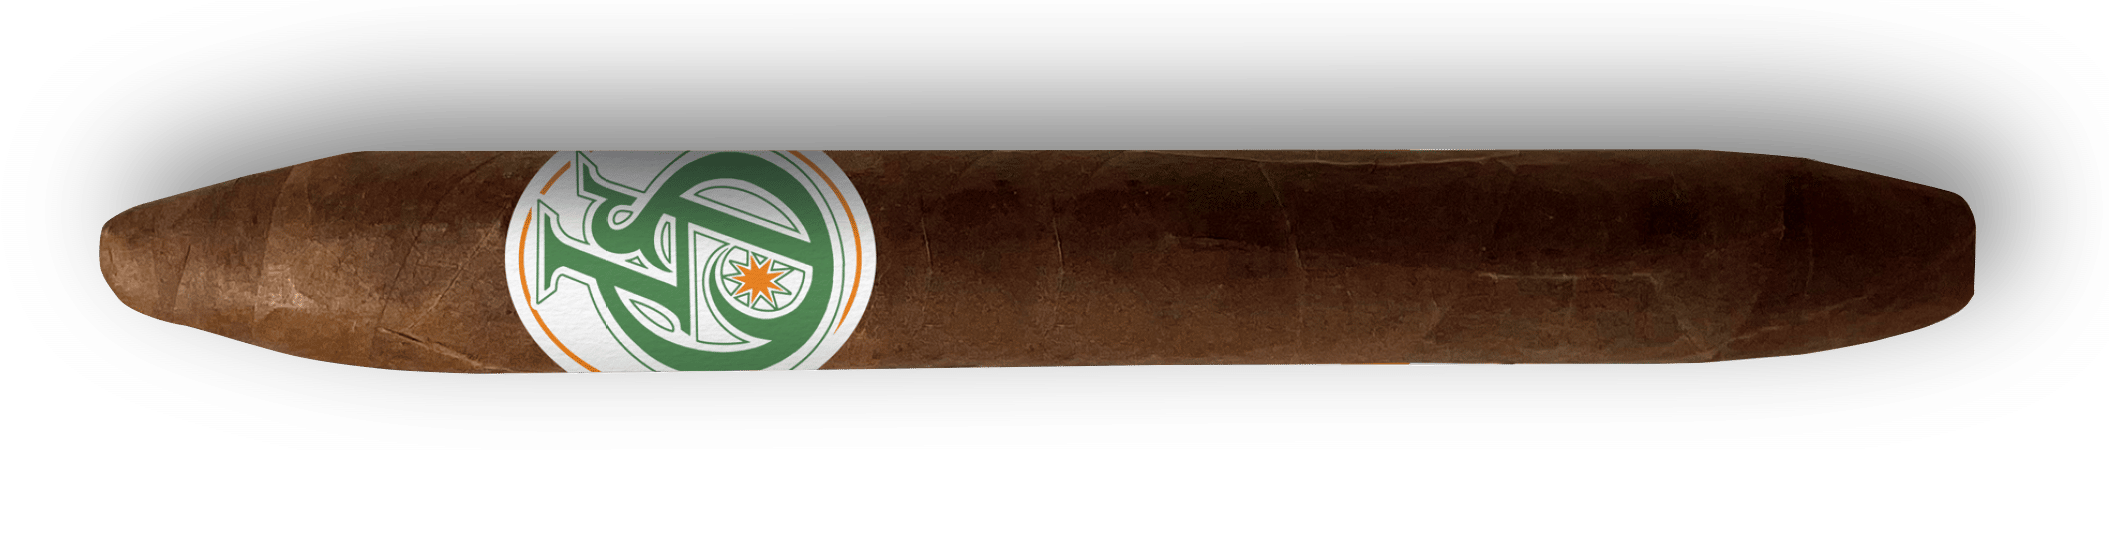 Matt Booth and Forged Announce Los Statos Deluxe Revamp - Cigar News